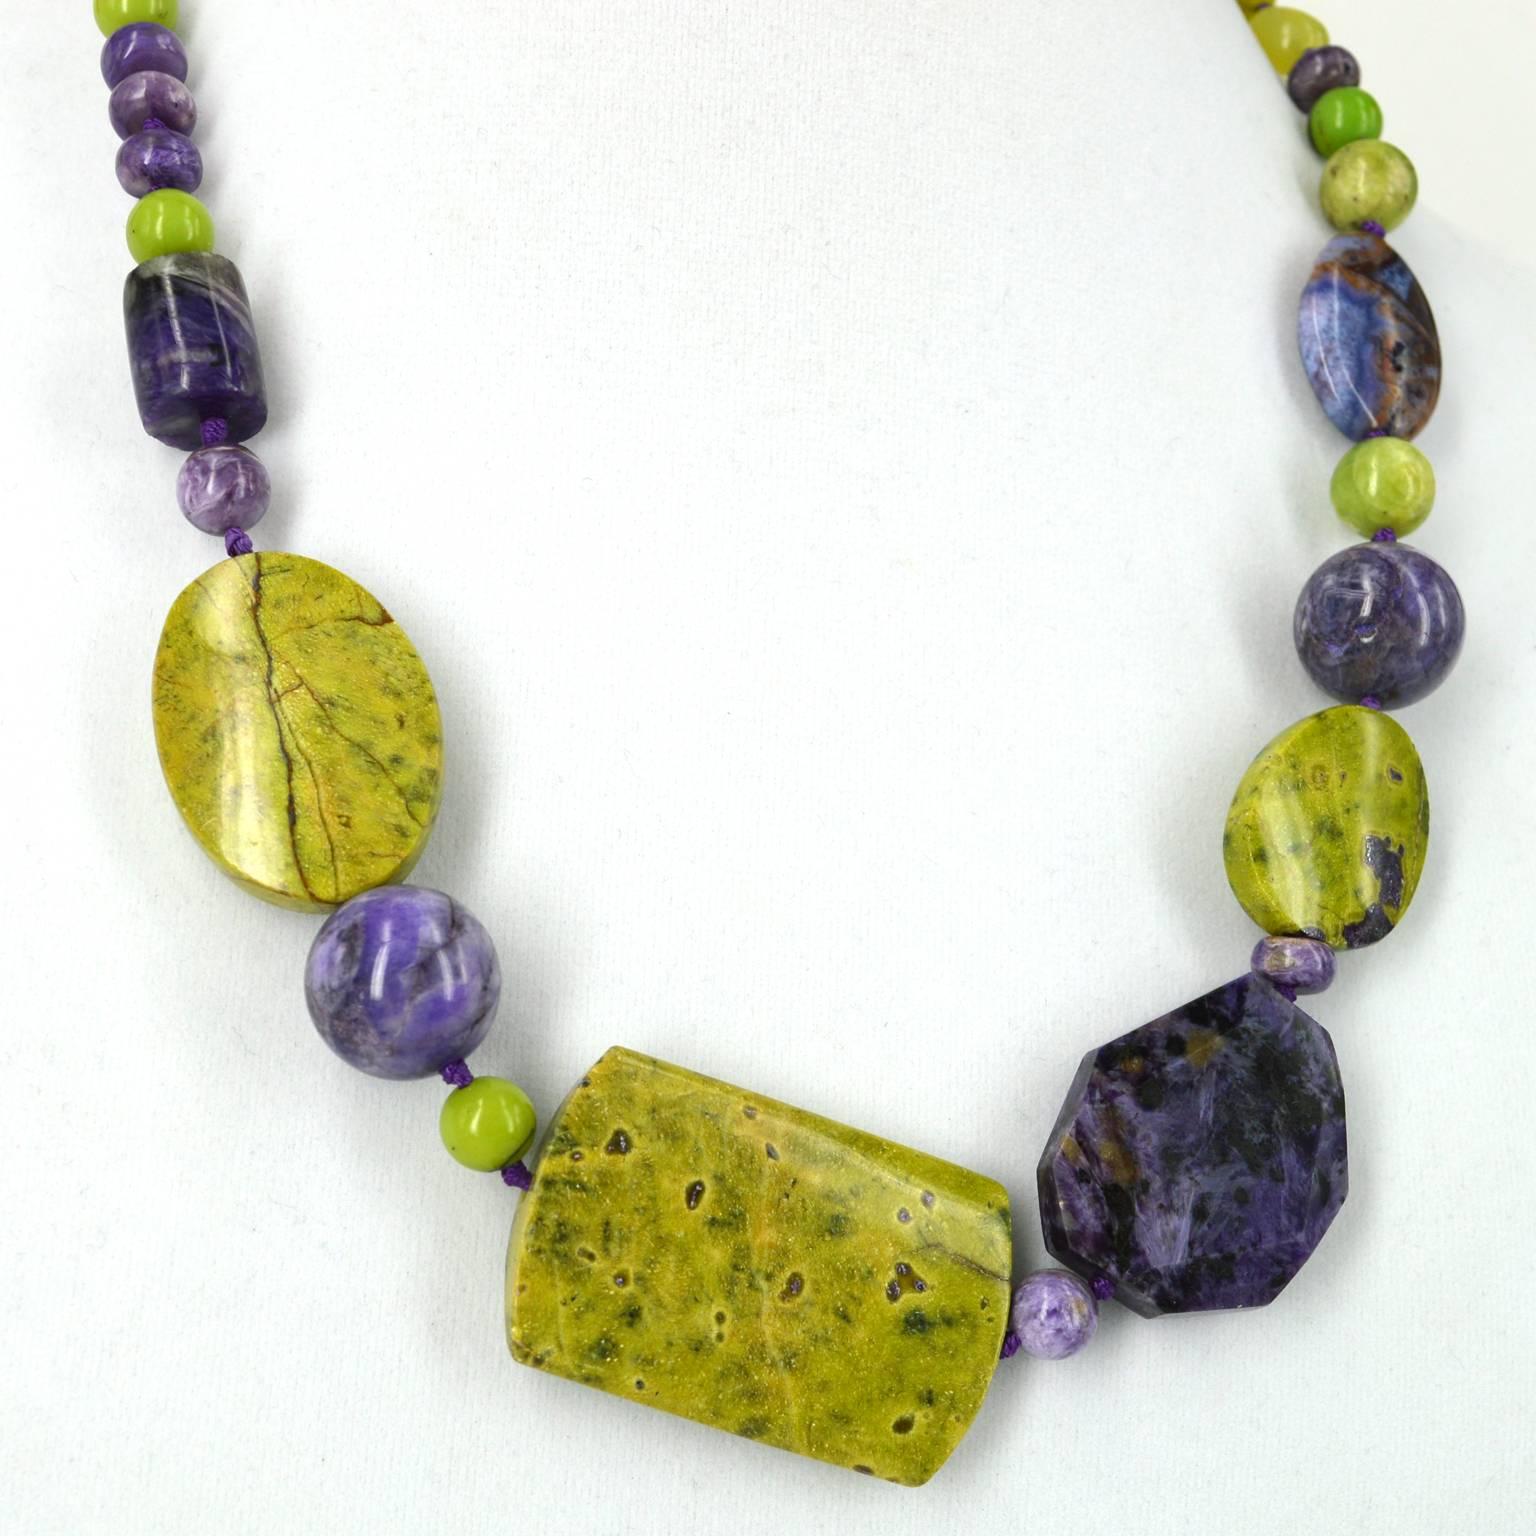 Stitchite Necklace- two Rare and beautiful gemstones combine and enhance each other in this necklace.
Stitchite-is a mineral, a carbonate of chromium and magnesium that is the purple flecks found in the green Serpentine.
Stitchite is only found only